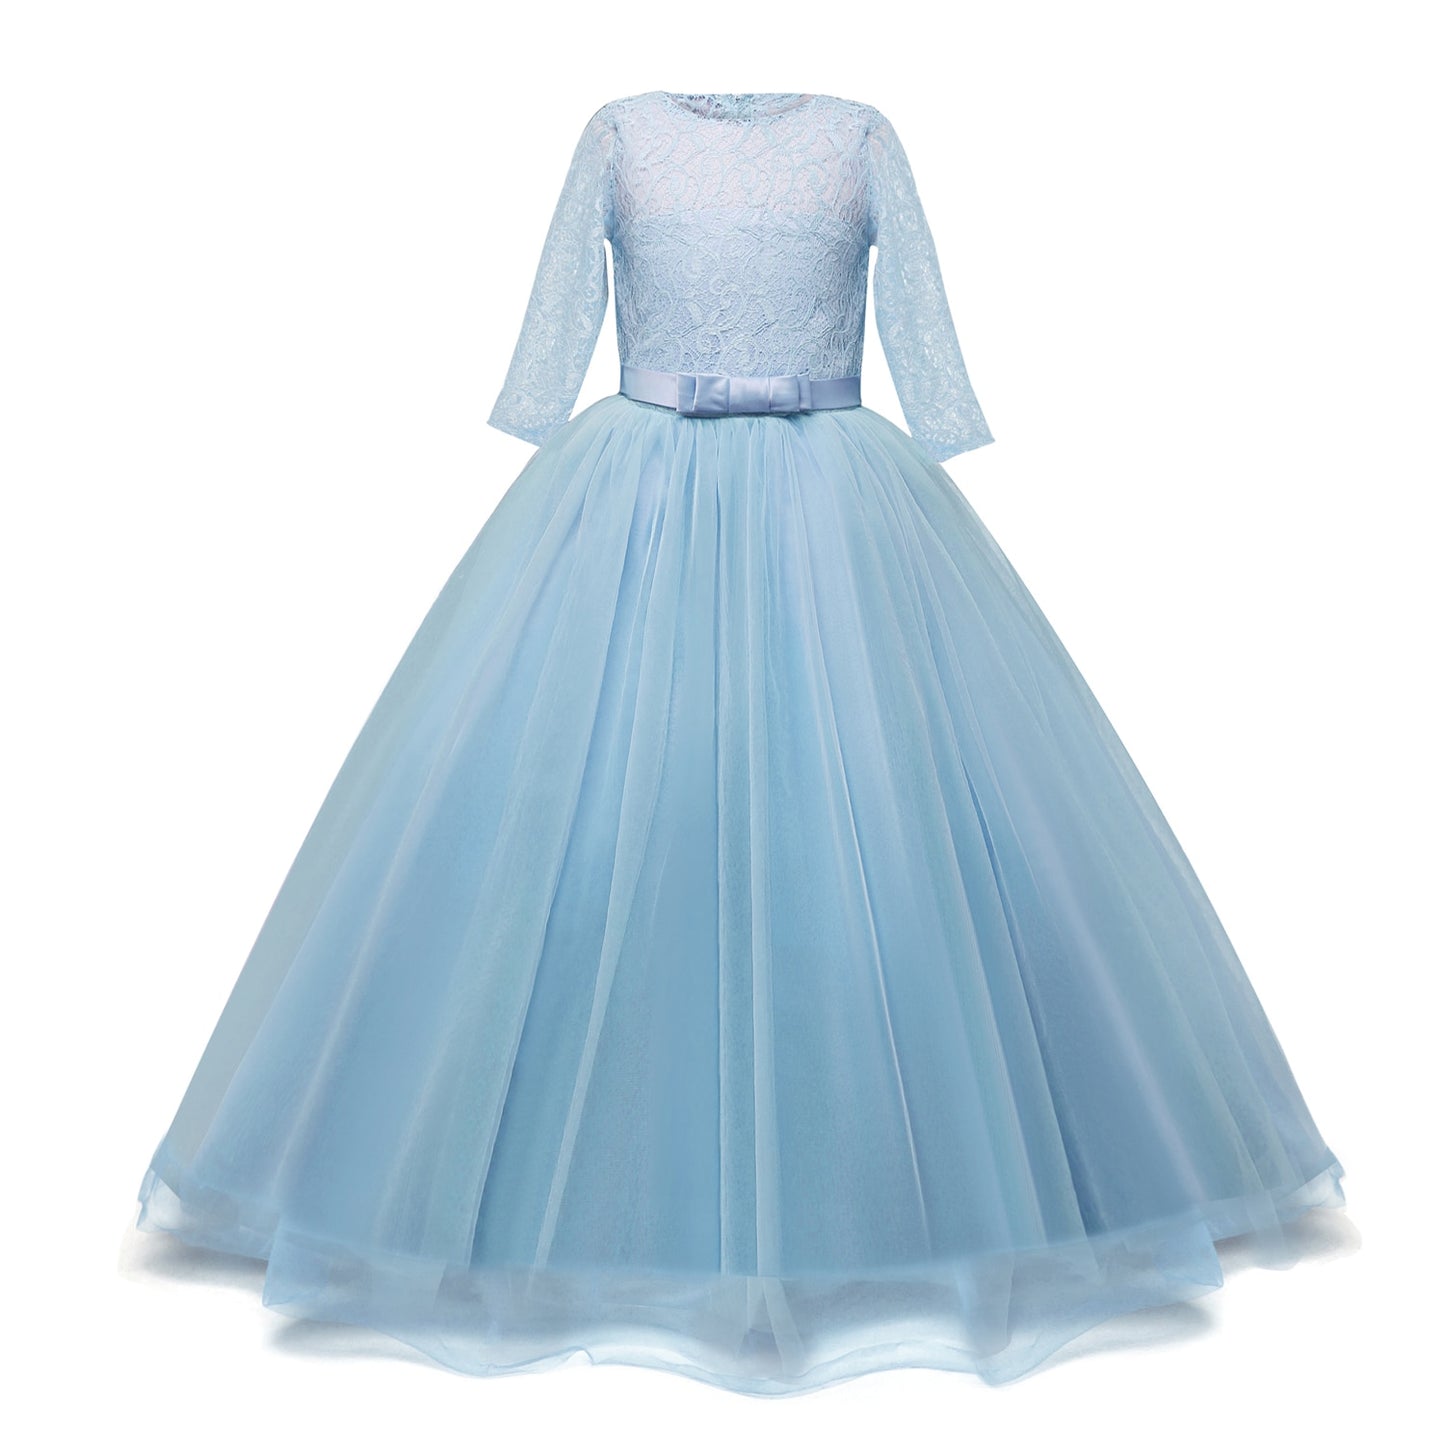 Kid Wedding Dresses for Girls Elegant Flower Princess Long Gown Baby Girl Christmas Dress Size 6 12 14 Years The Clothing Company Sydney